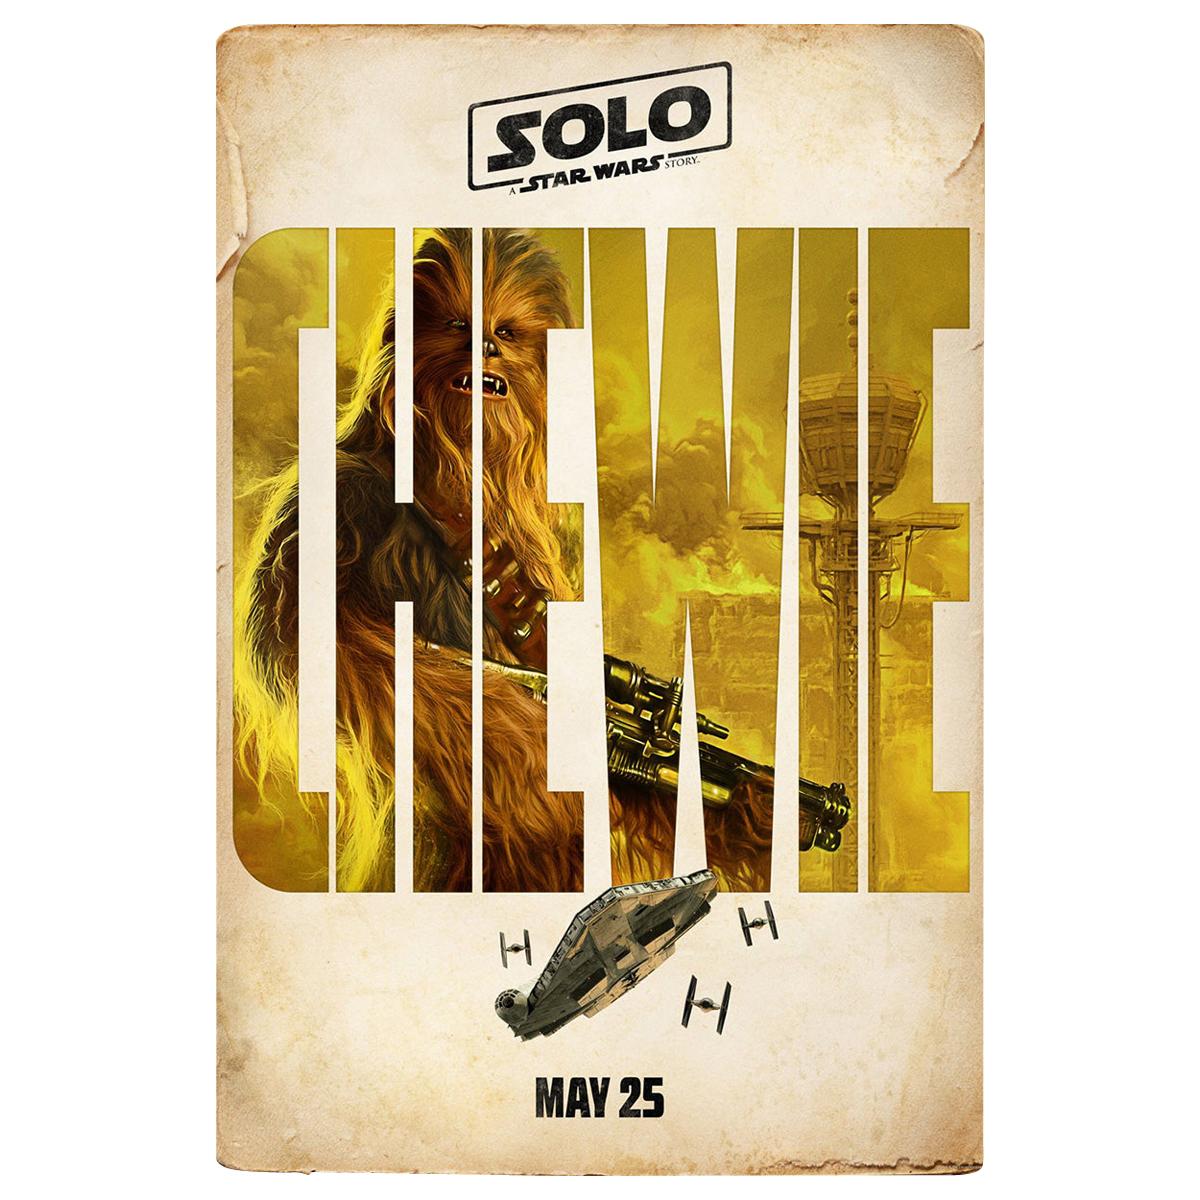 Solo: A Star Wars Story, 2018, Chewie Poster For Sale